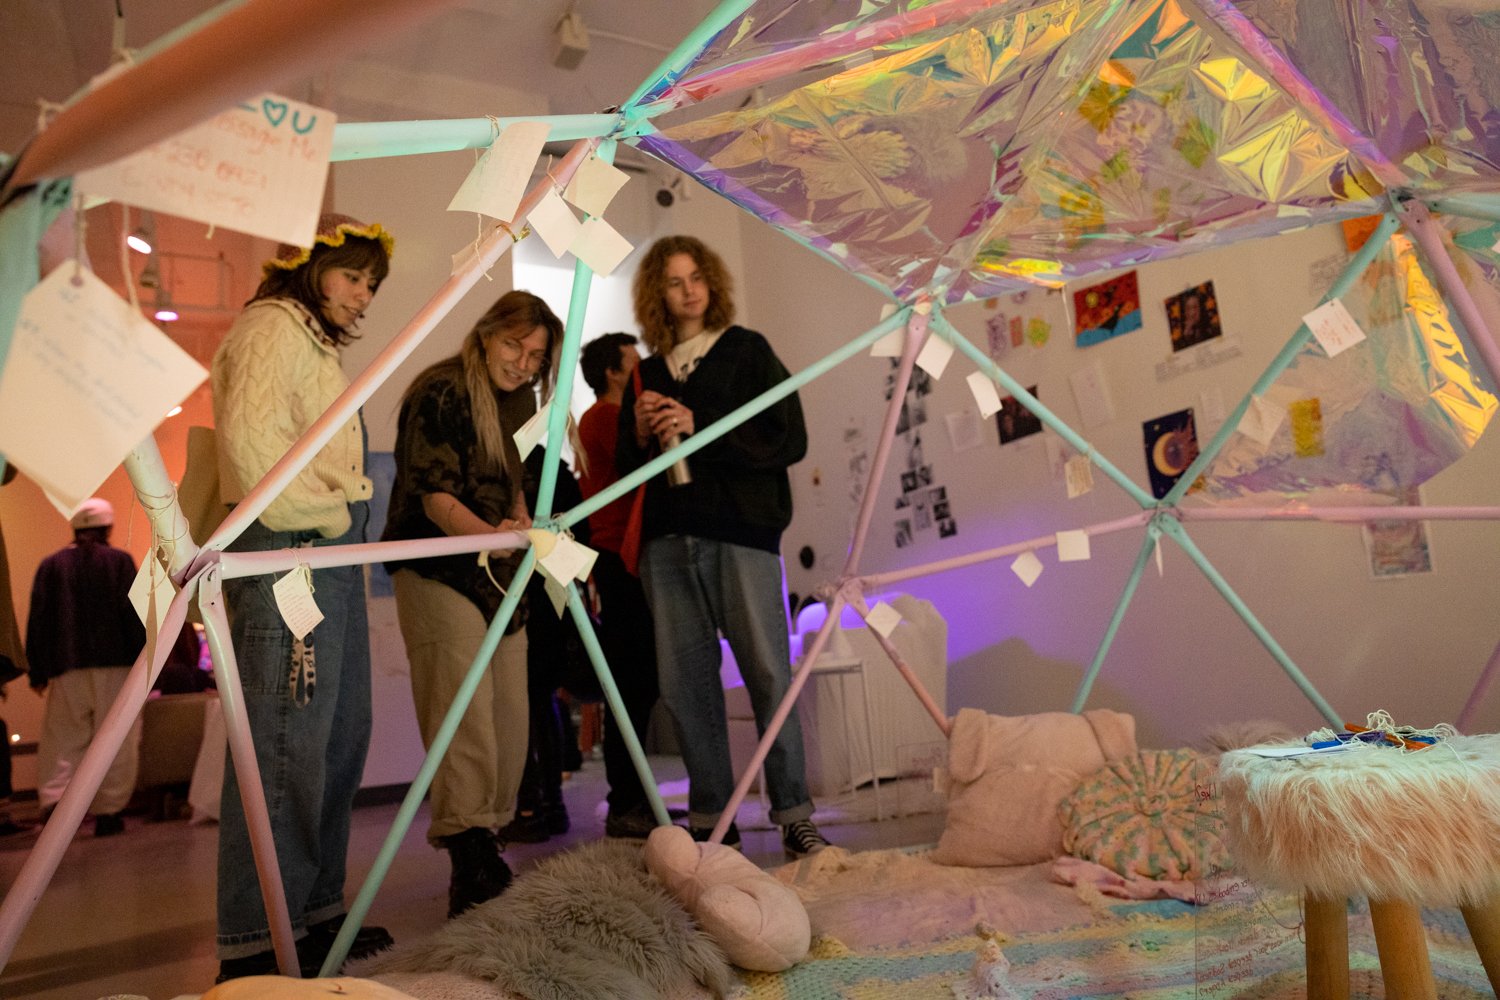 Another corner of the exhibit featured a large pastel, iridescent dome, filled with stuffed toys made by Bianca Thompson